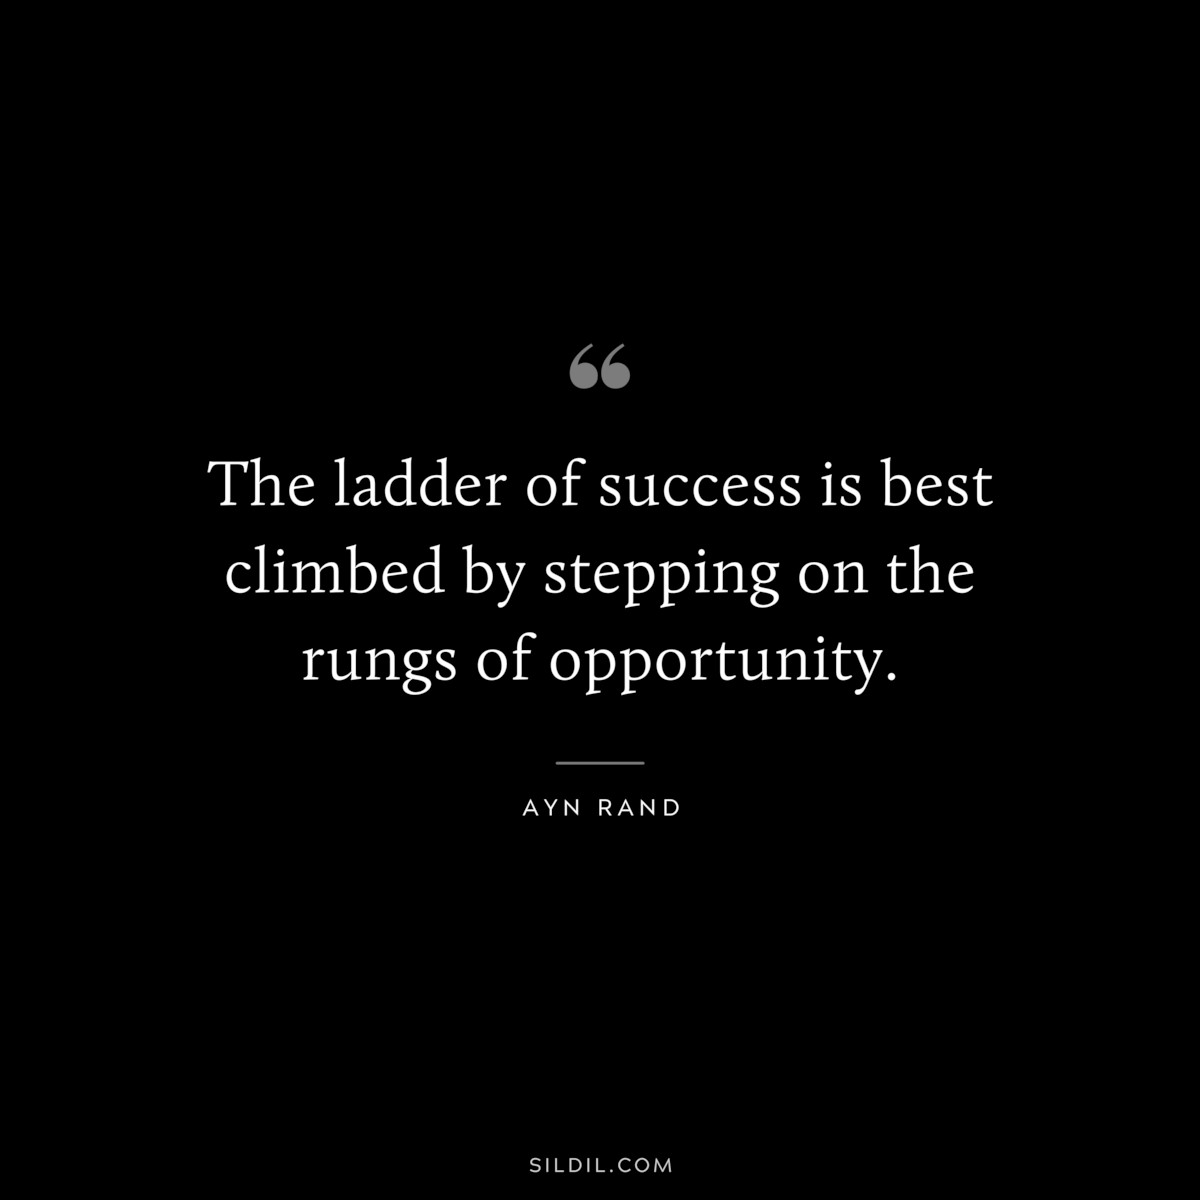 The ladder of success is best climbed by stepping on the rungs of opportunity. ― Ayn Rand